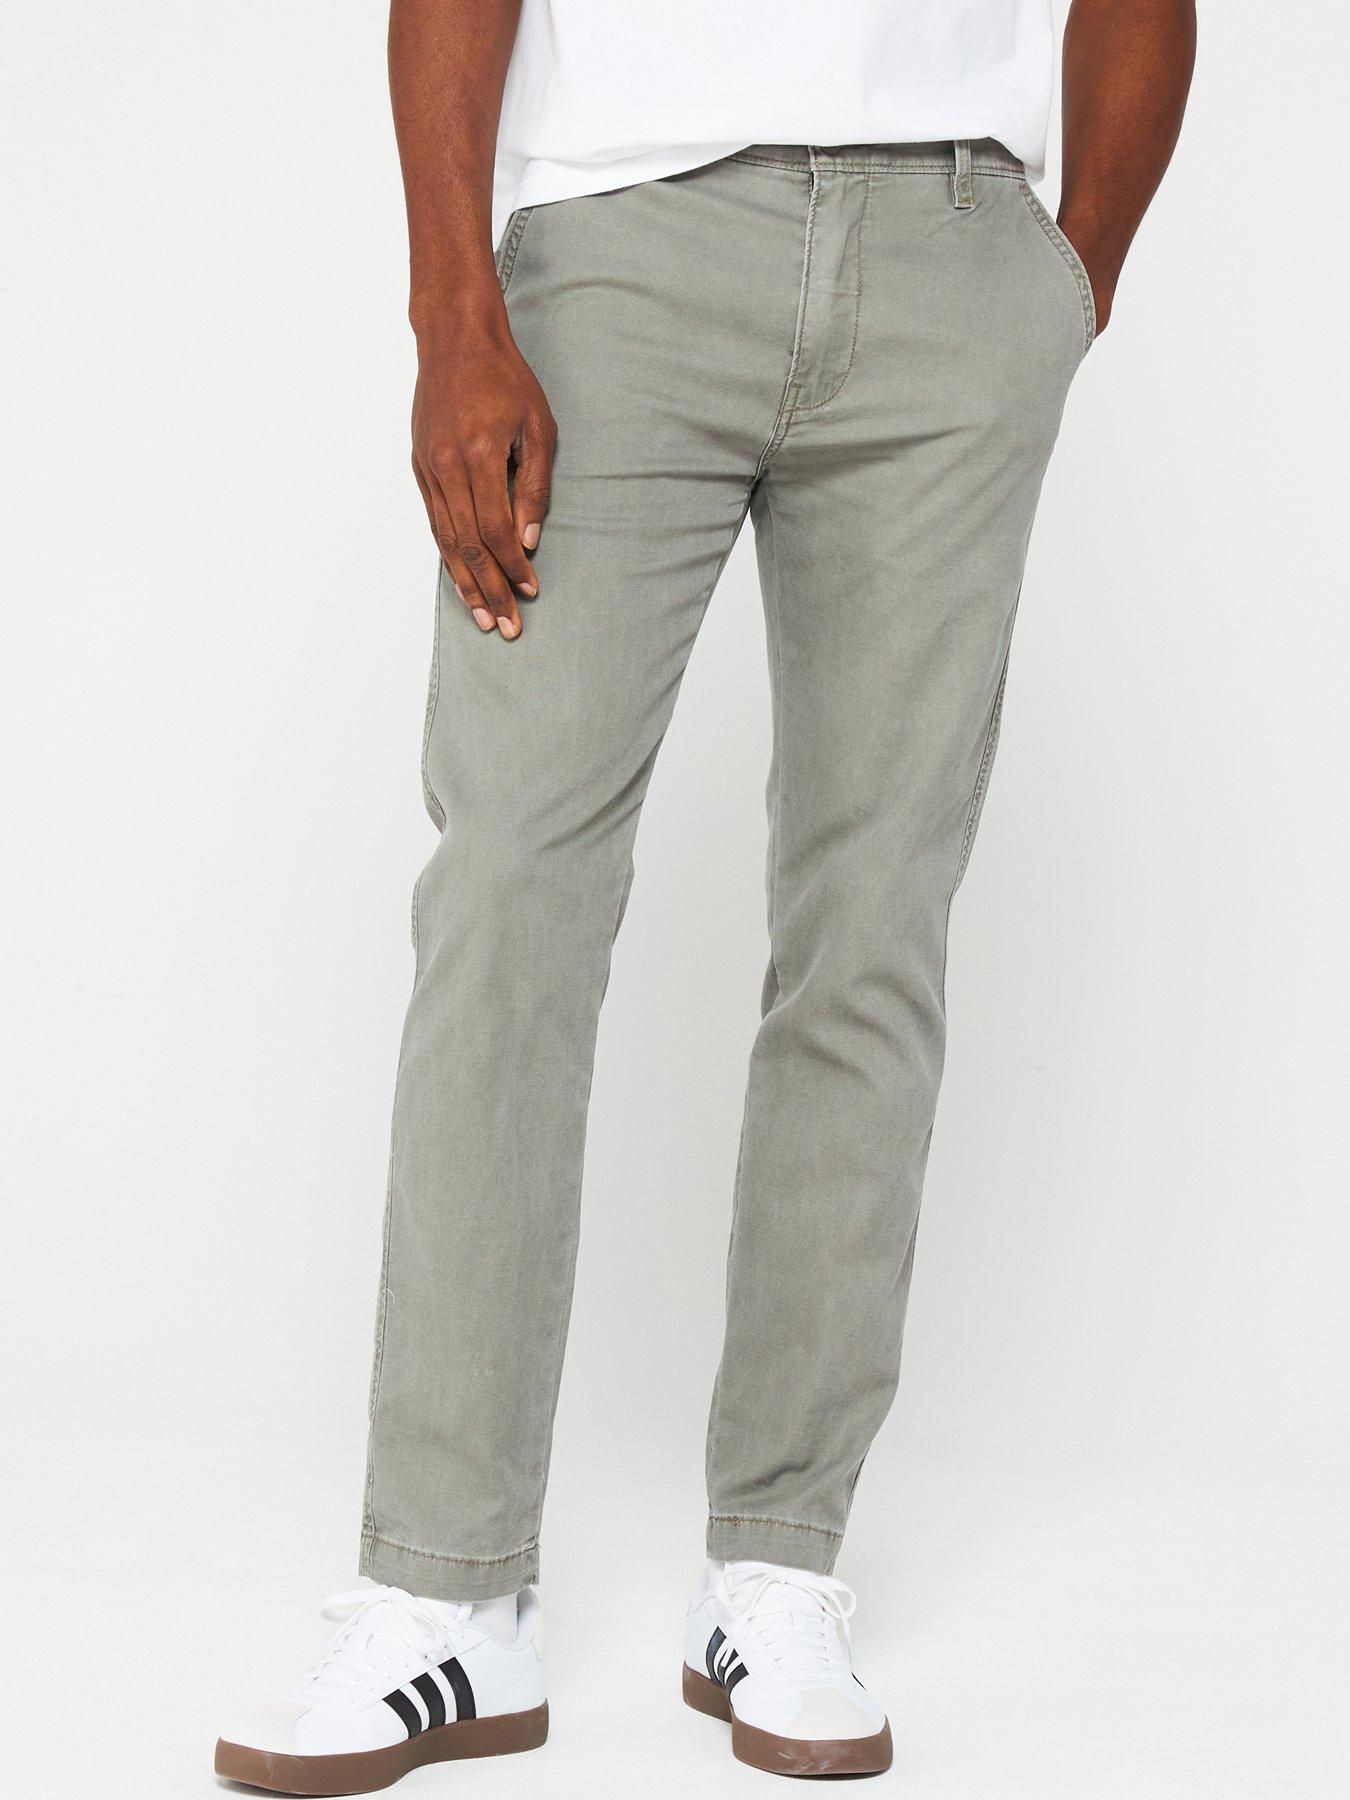 Levi's Baggy trouser in tan with pockets | ASOS